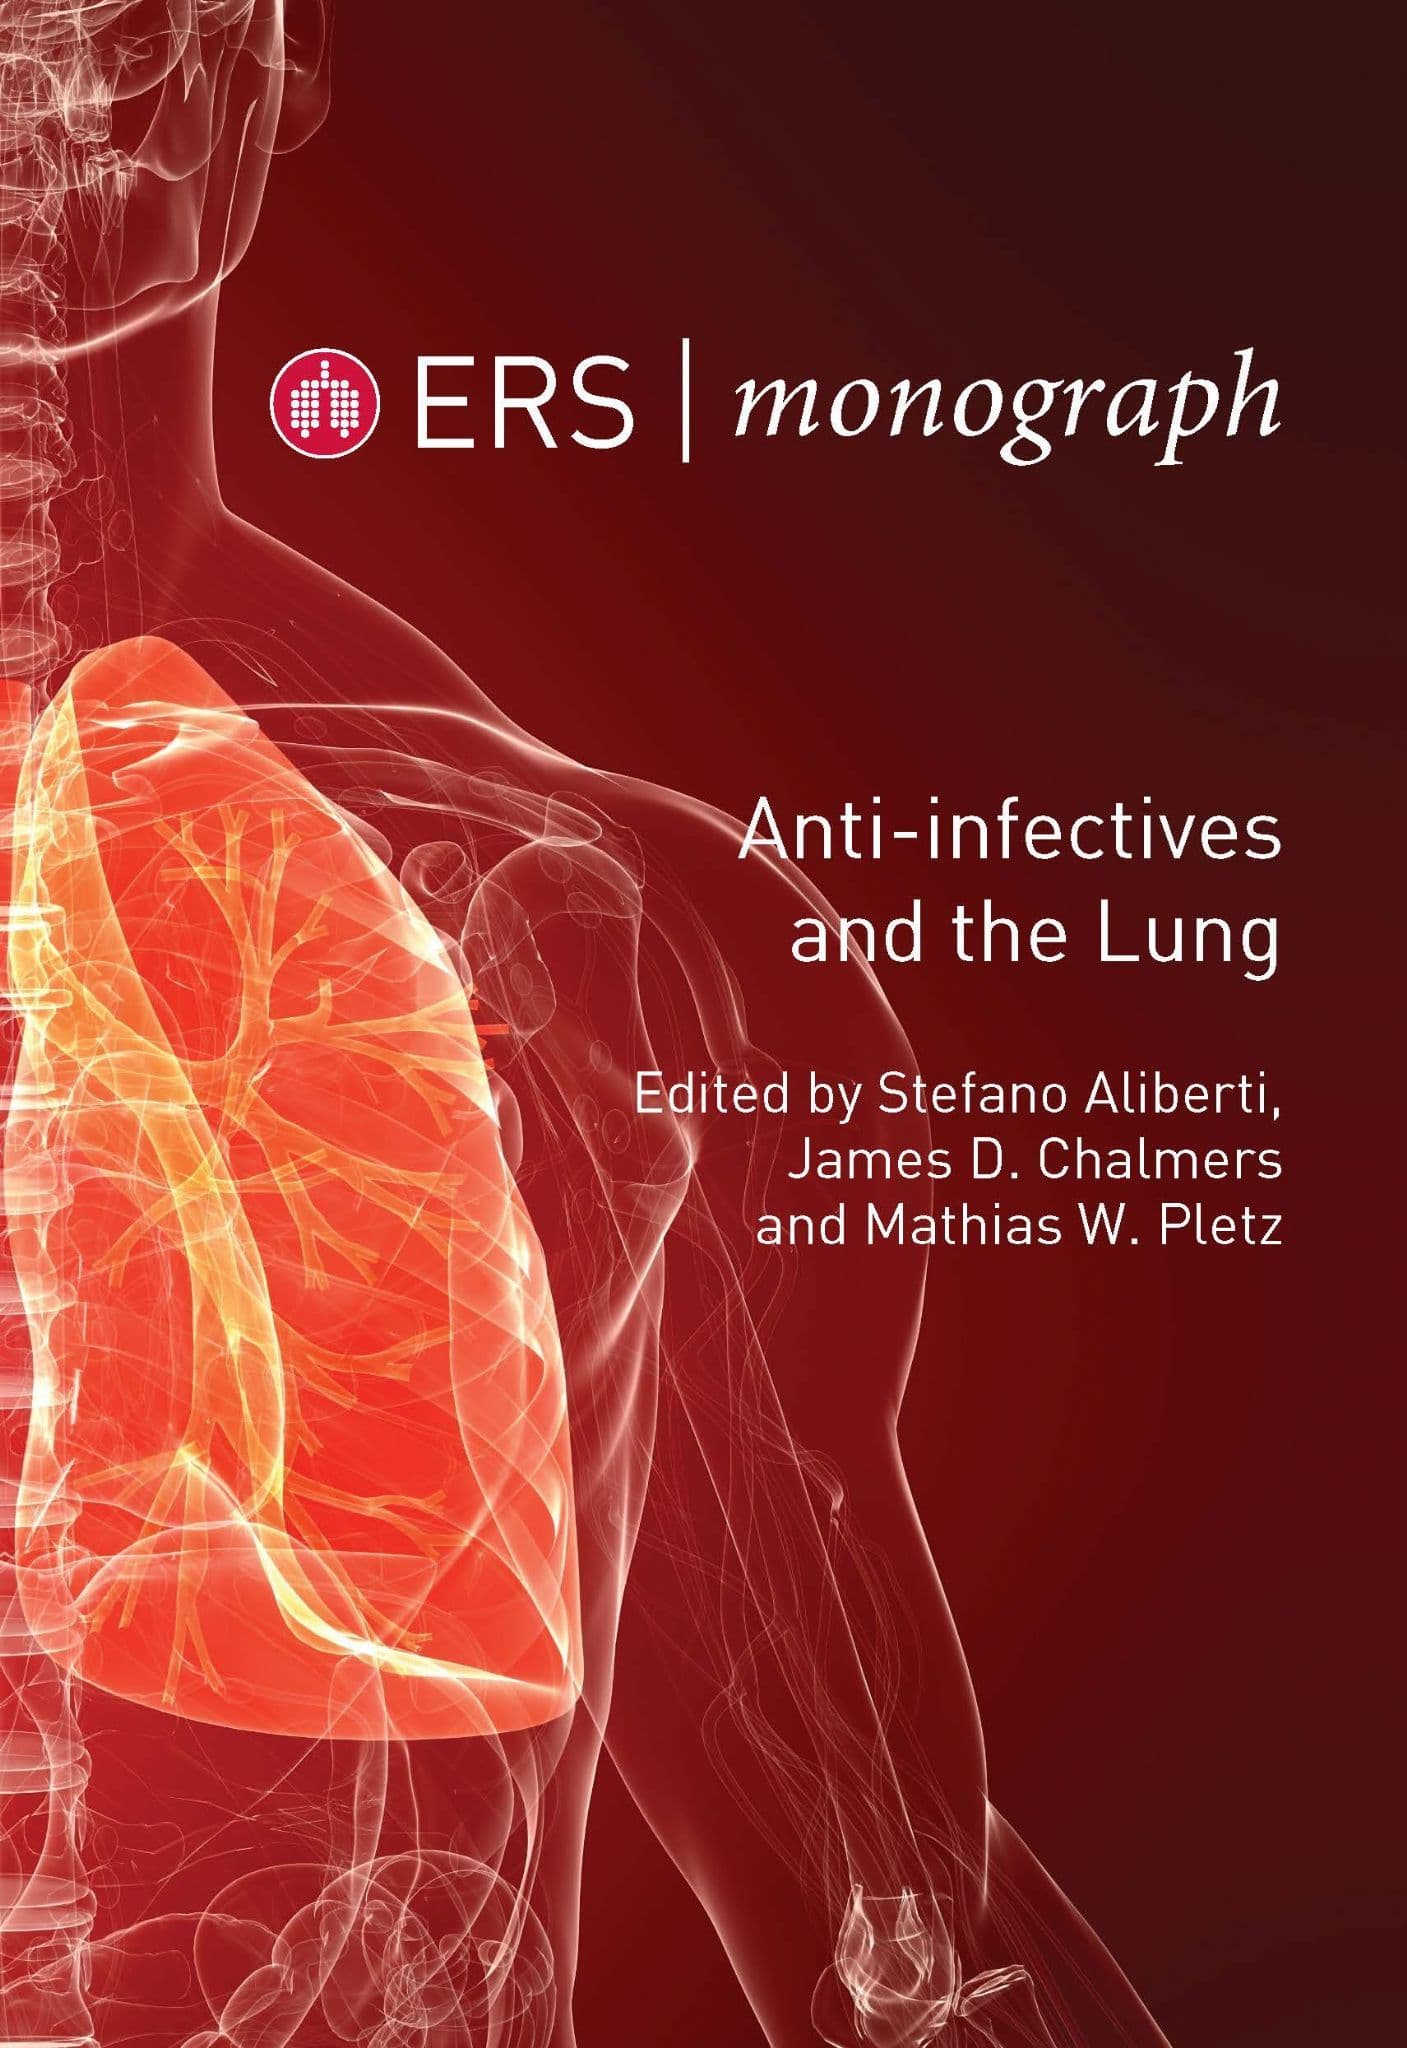 Anti-infectives and the Lung